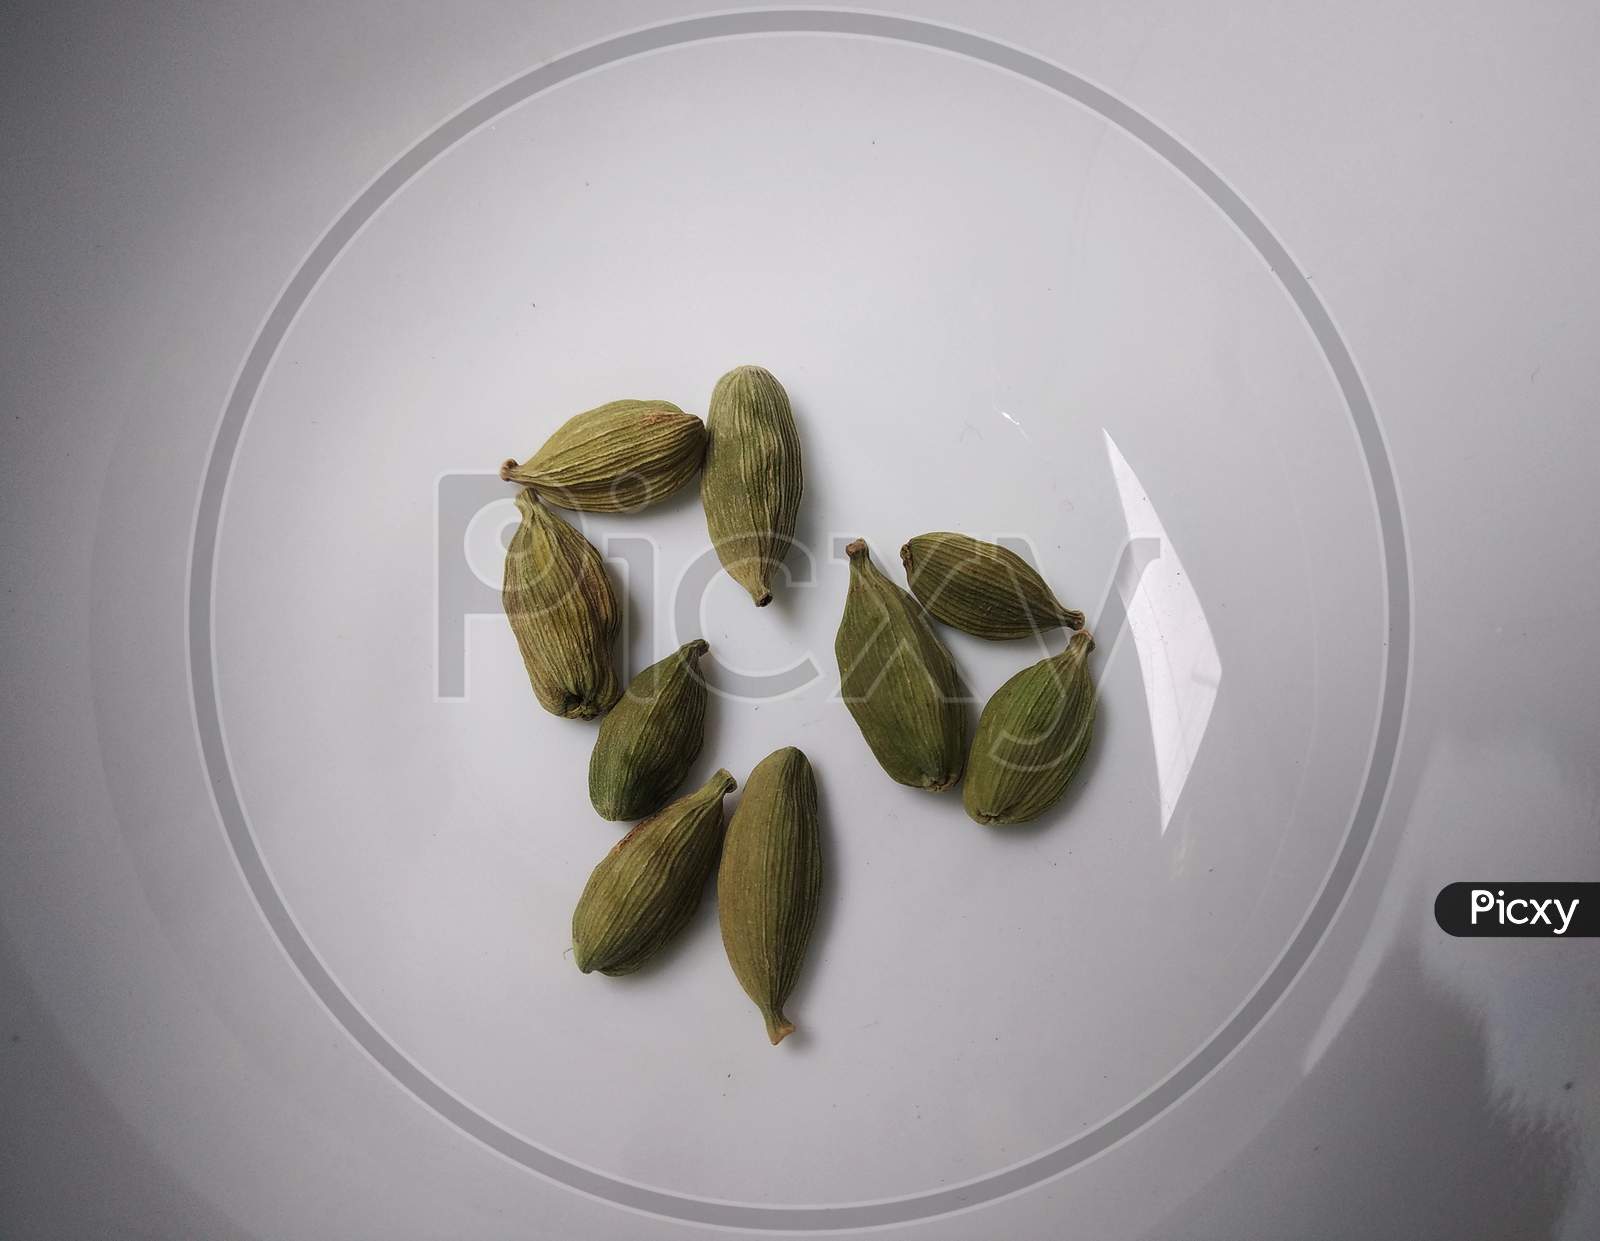 Green cardamom are used as flavourings and cooking spices in both food and drink, and as a medicine